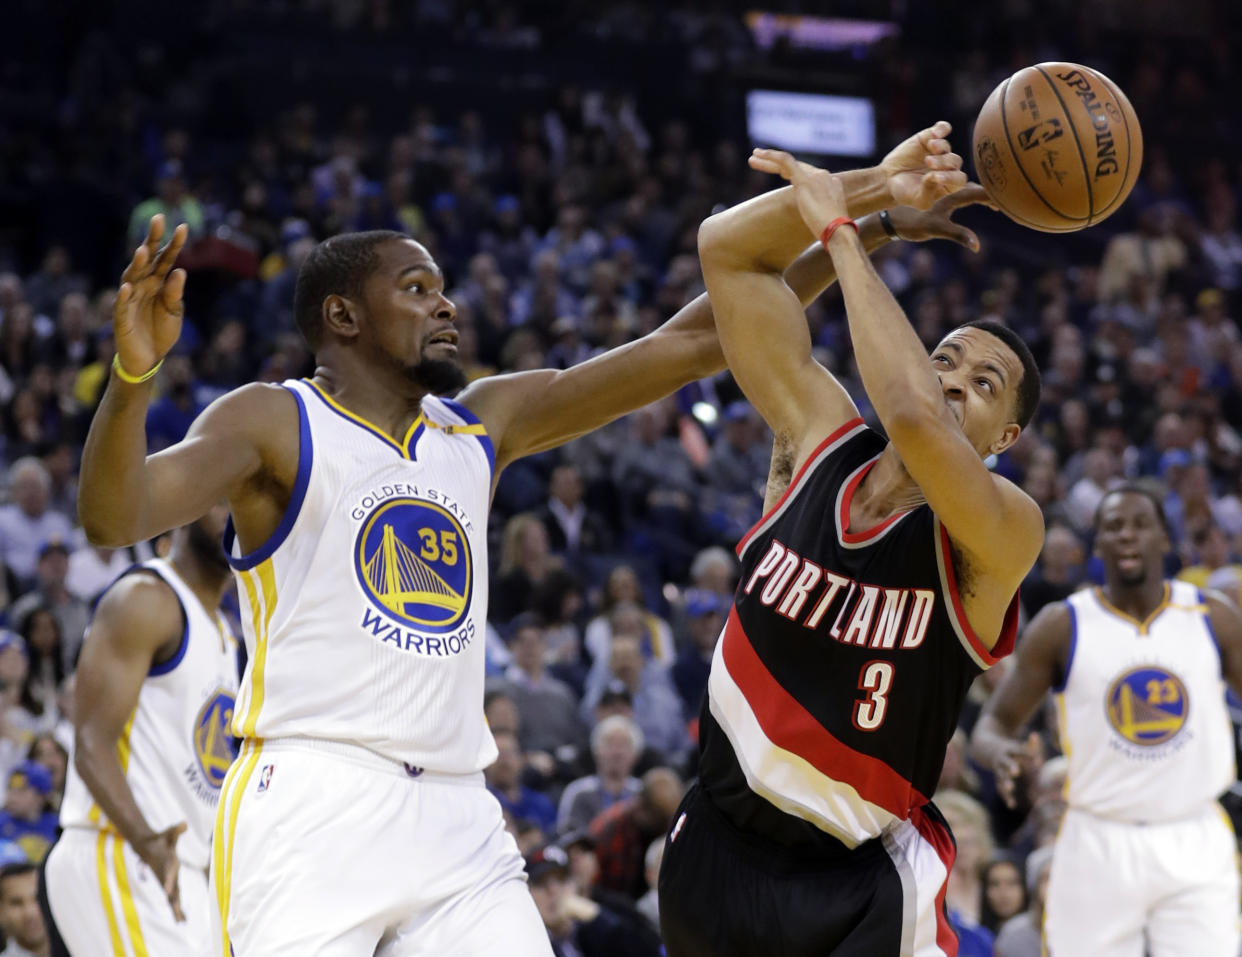 Kevin Durant and C.J. McCollum traded shots on Twitter after a tense podcast conversation. (AP)